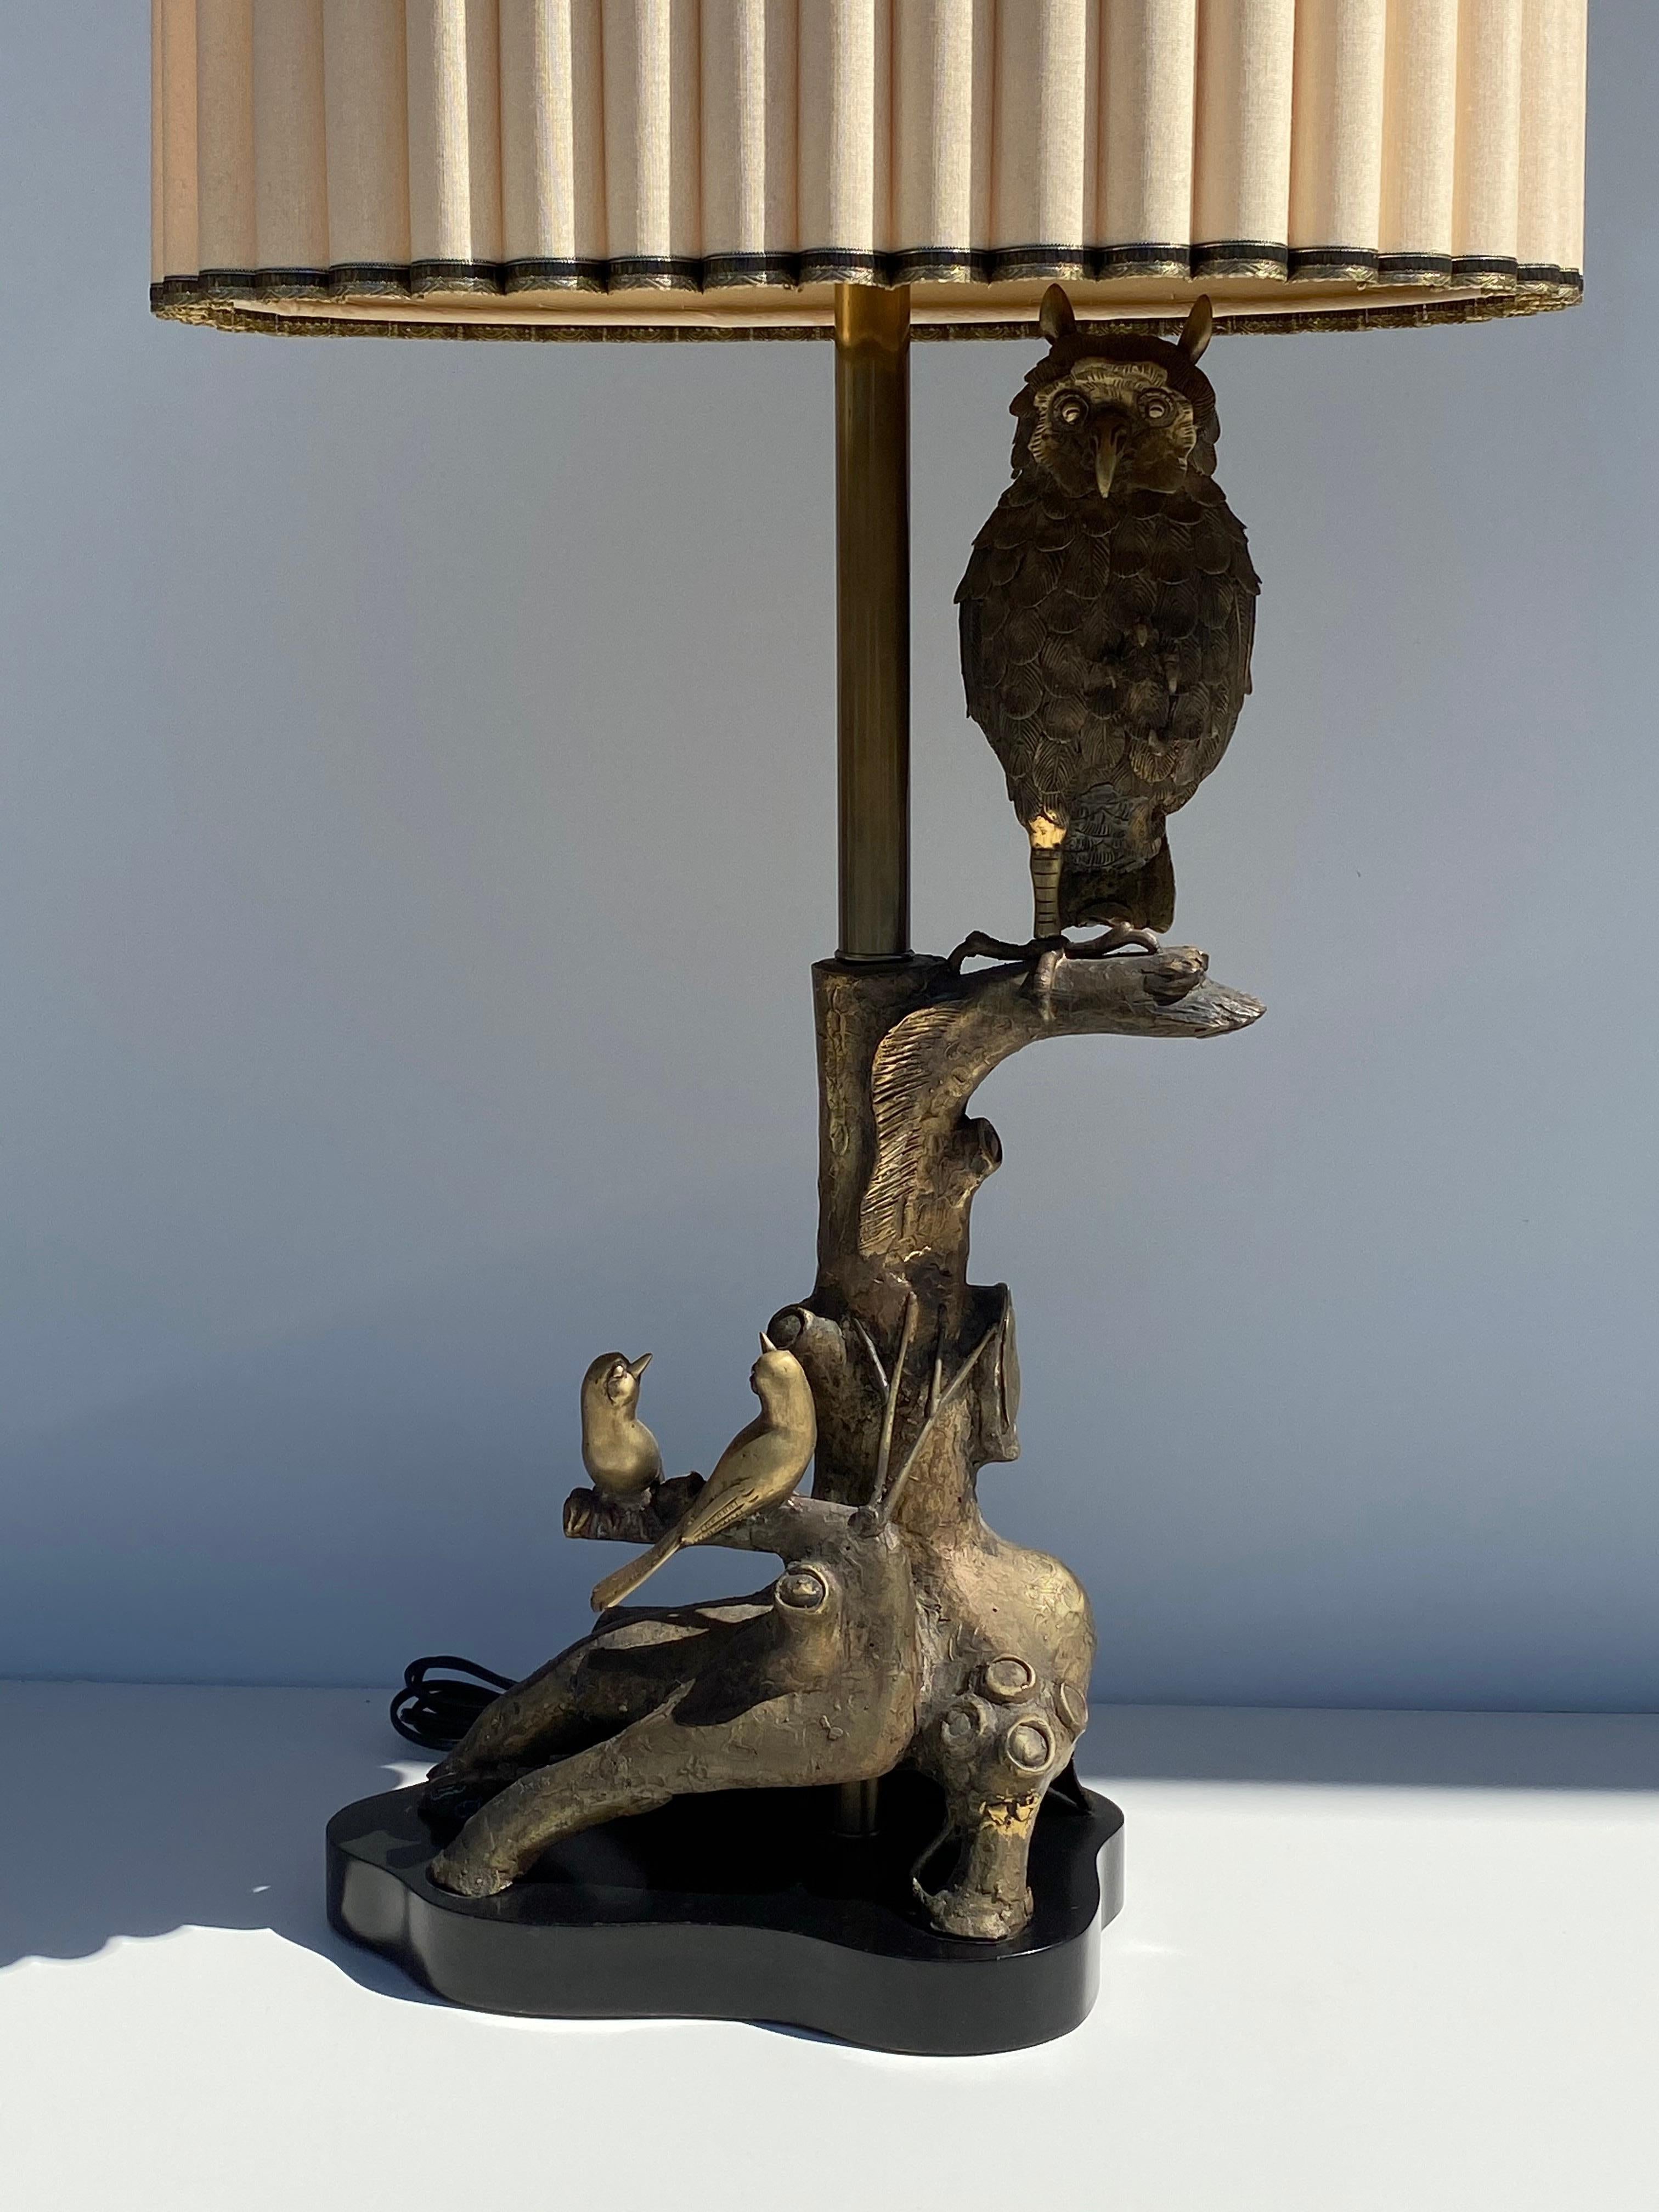 Patinated bronze owl lamp by with birds and tree trunk details by Marbro with original shade which is 17